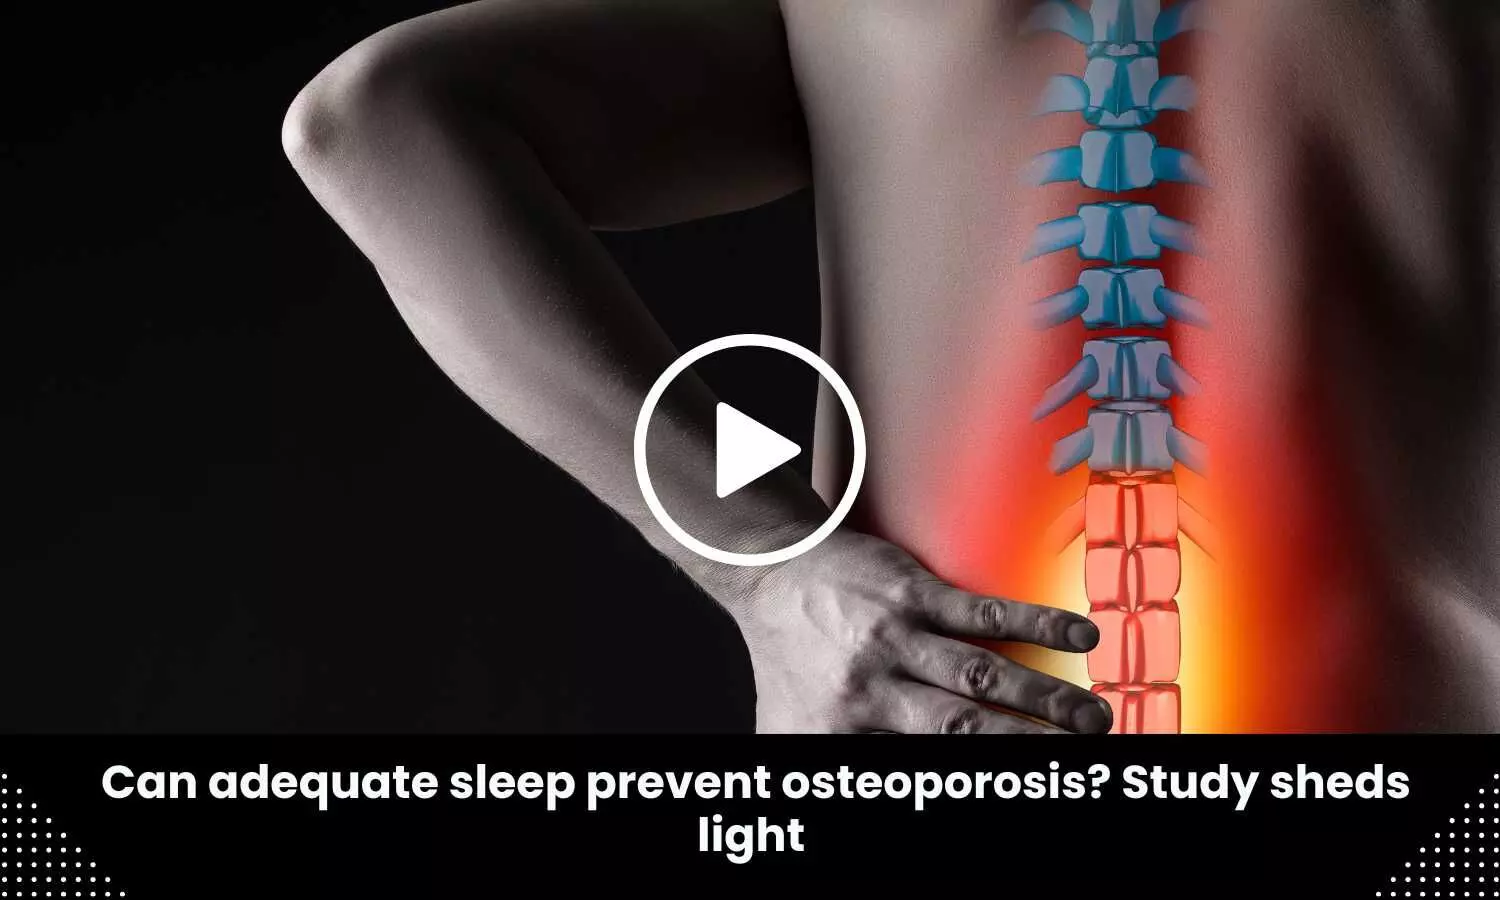 Can adequate sleep prevent osteoporosis? Study sheds light